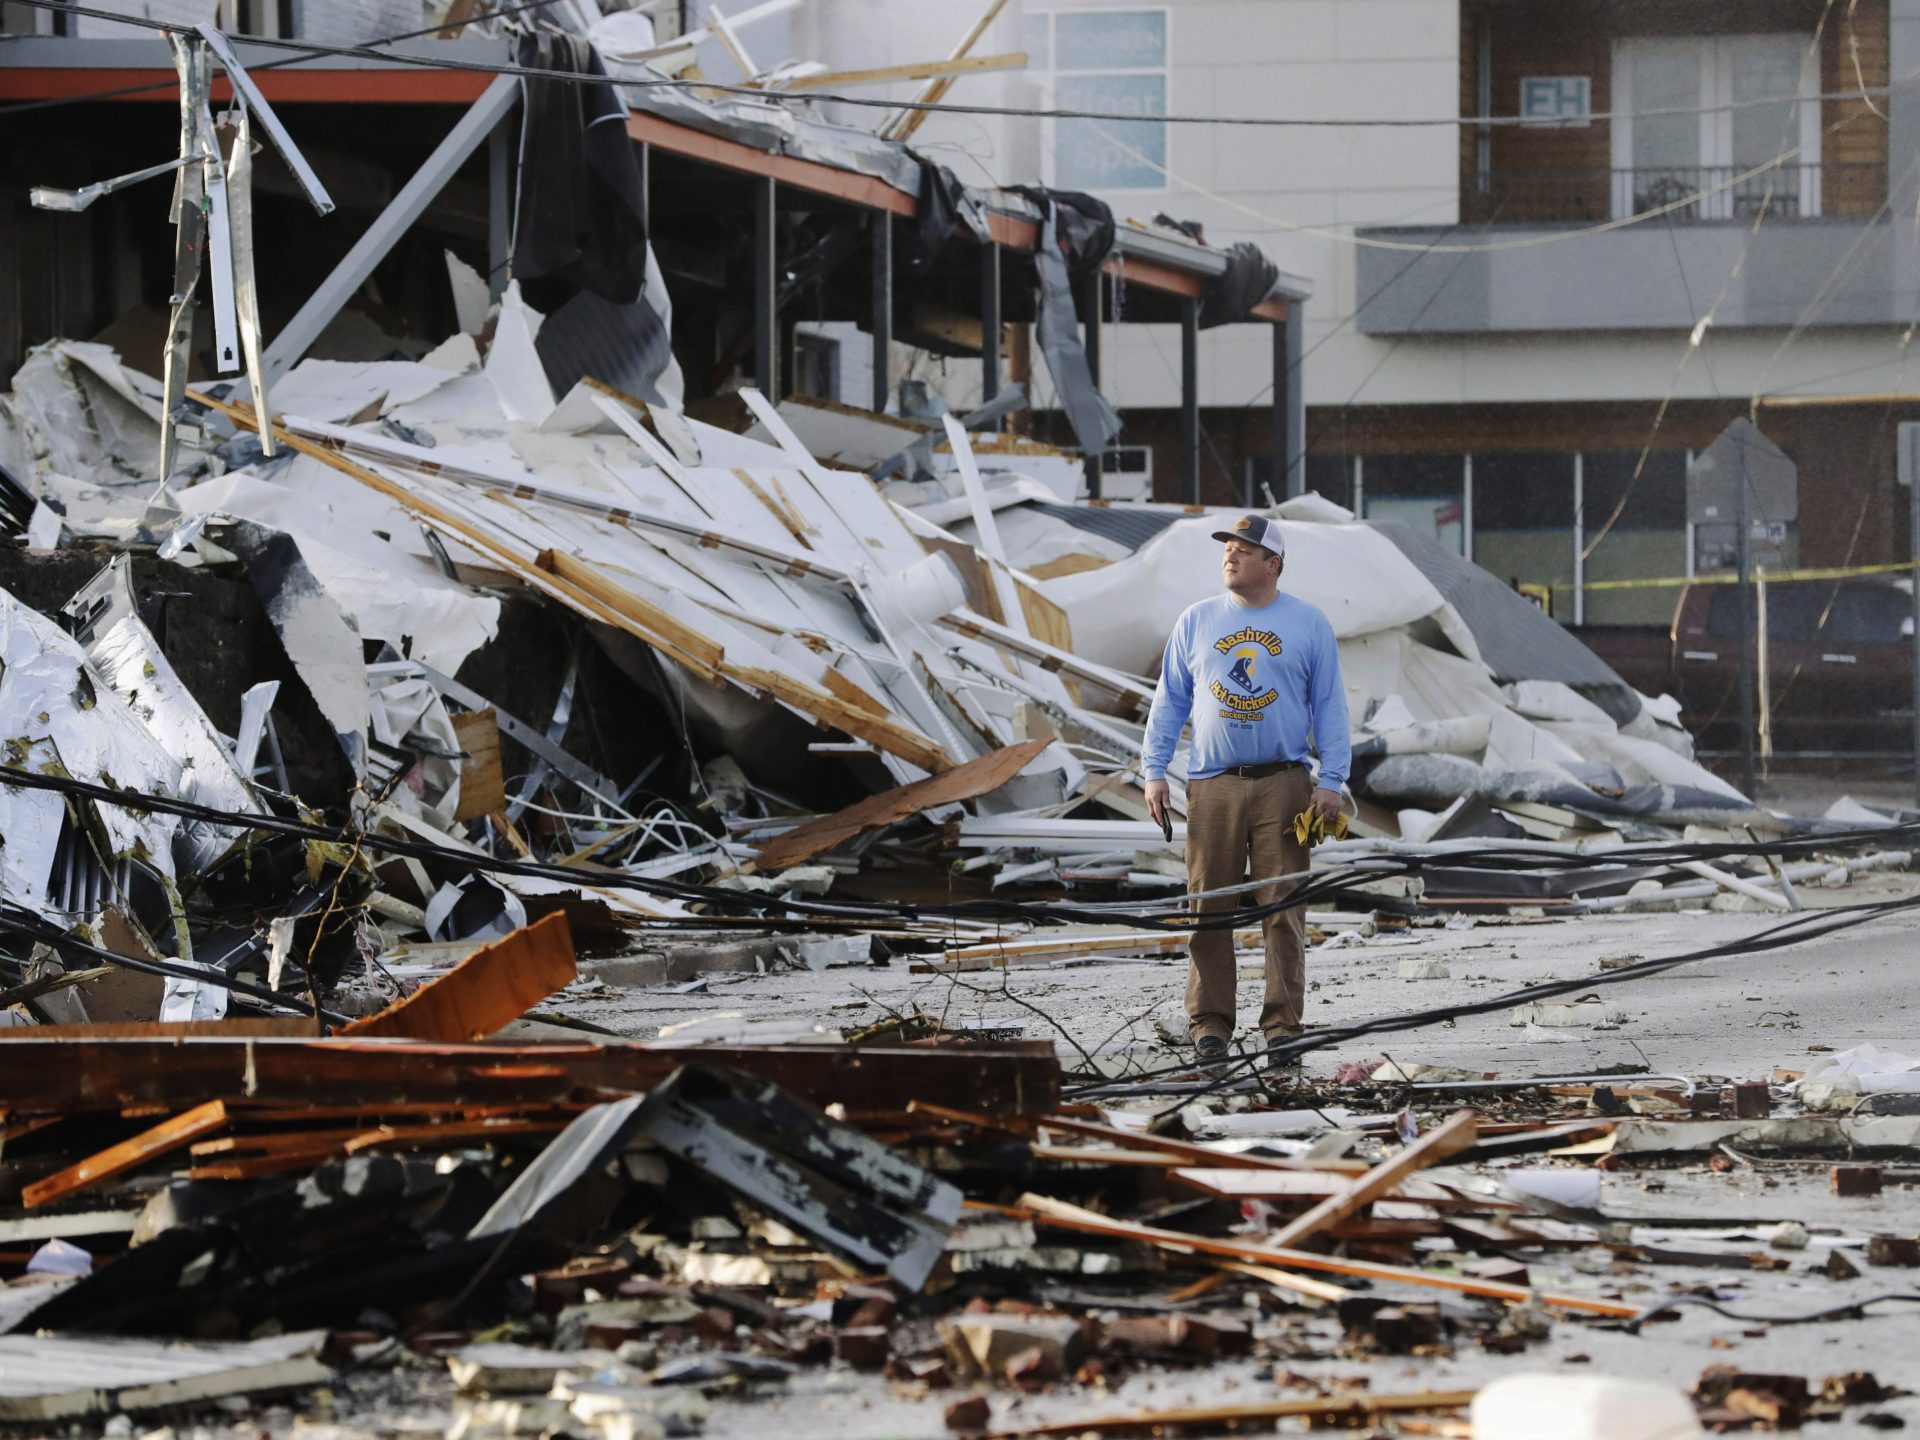 A man looks over buildings destroyed by storms on Tuesday in Nashville, Tenn. Tornadoes ripped across Tennessee early Tuesday, shredding buildings and killing multiple people.